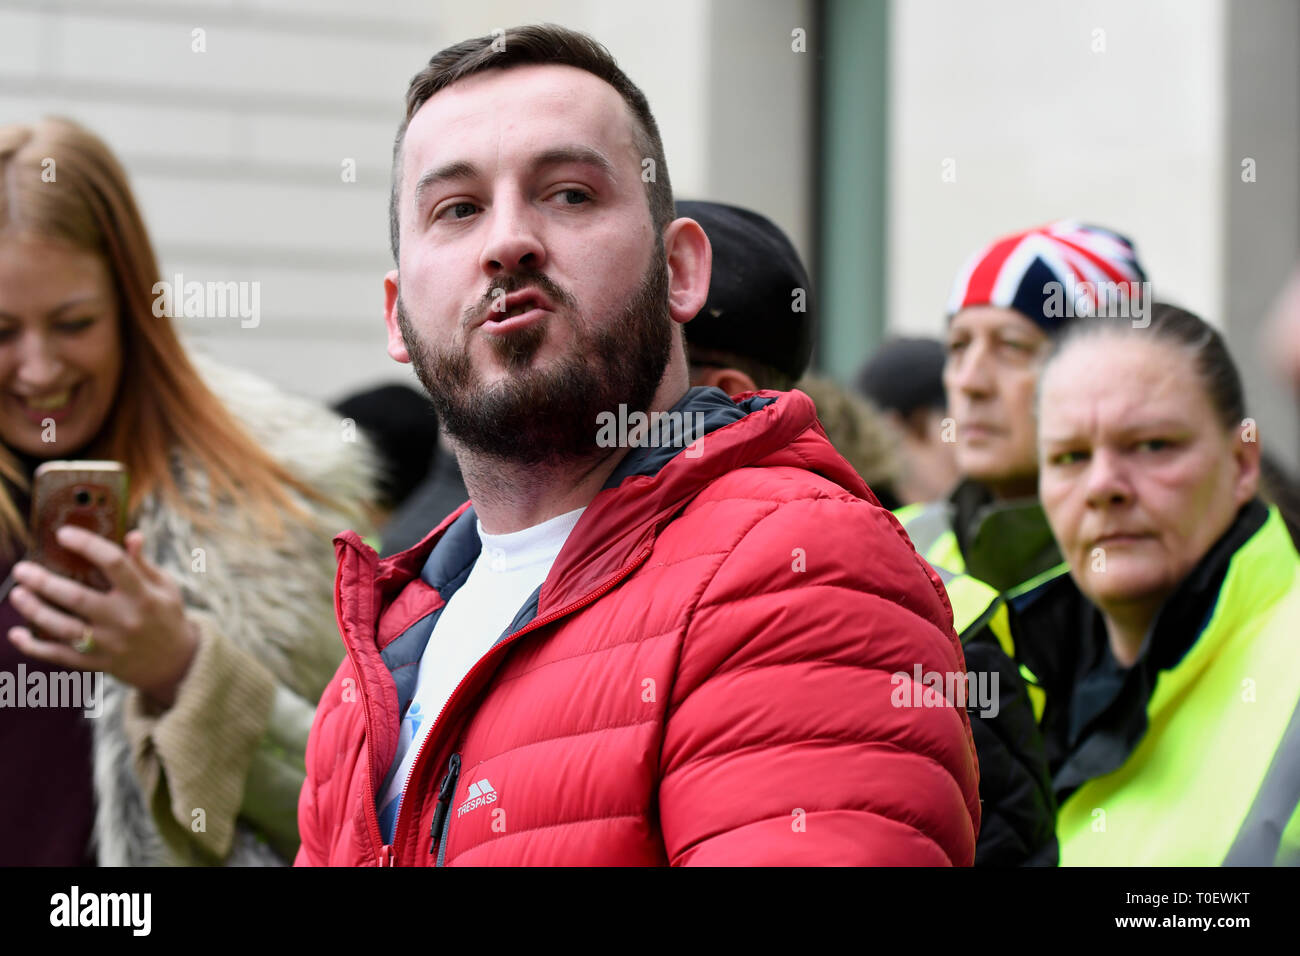 James Goddard seen outside Westminster Magistrates’ Court where he is being interviewed after the hearing. Brexit protester and leading member of the 'Yellow Vest UK' movement James Goddard appeared at the Westminster Magistrates’ Court where he was charged for harassing MP Anna Soubry outside Parliament, and he is also accused of two public order offences against a police officer. Few supporters of Goddard where present outside Westminster Magistrates’ Court. Stock Photo